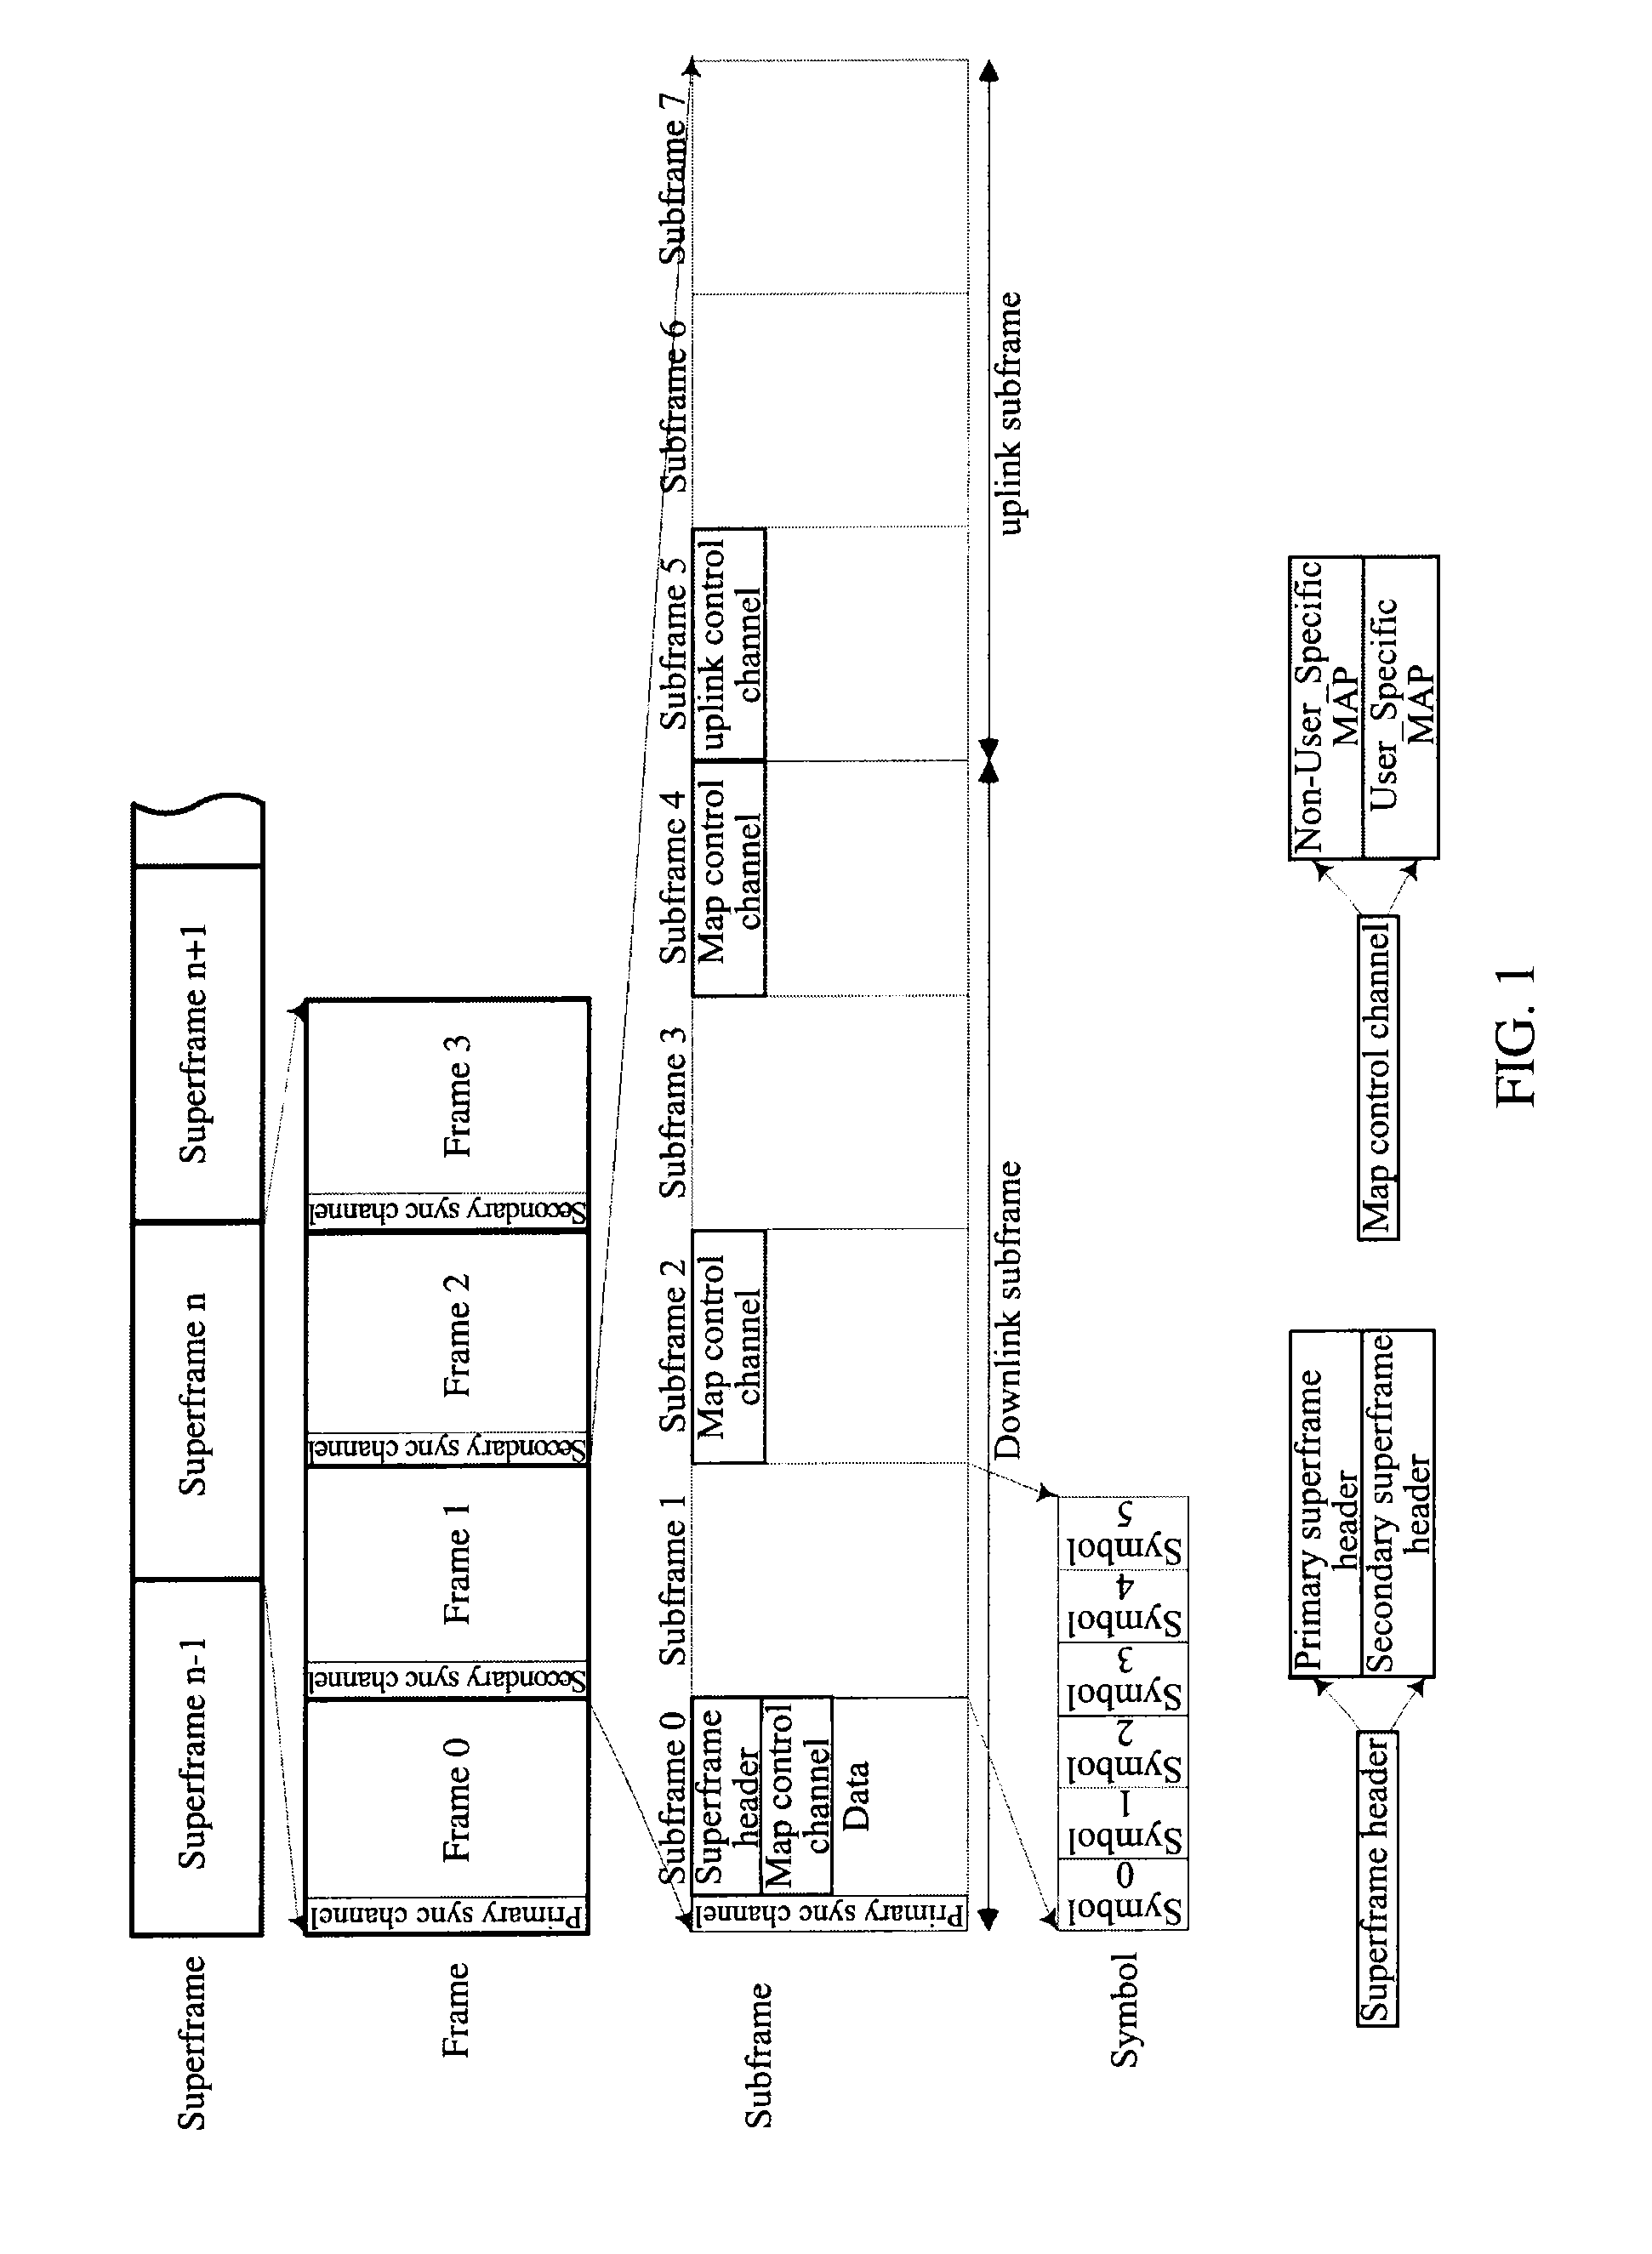 Processing Method for Group Resource Allocation